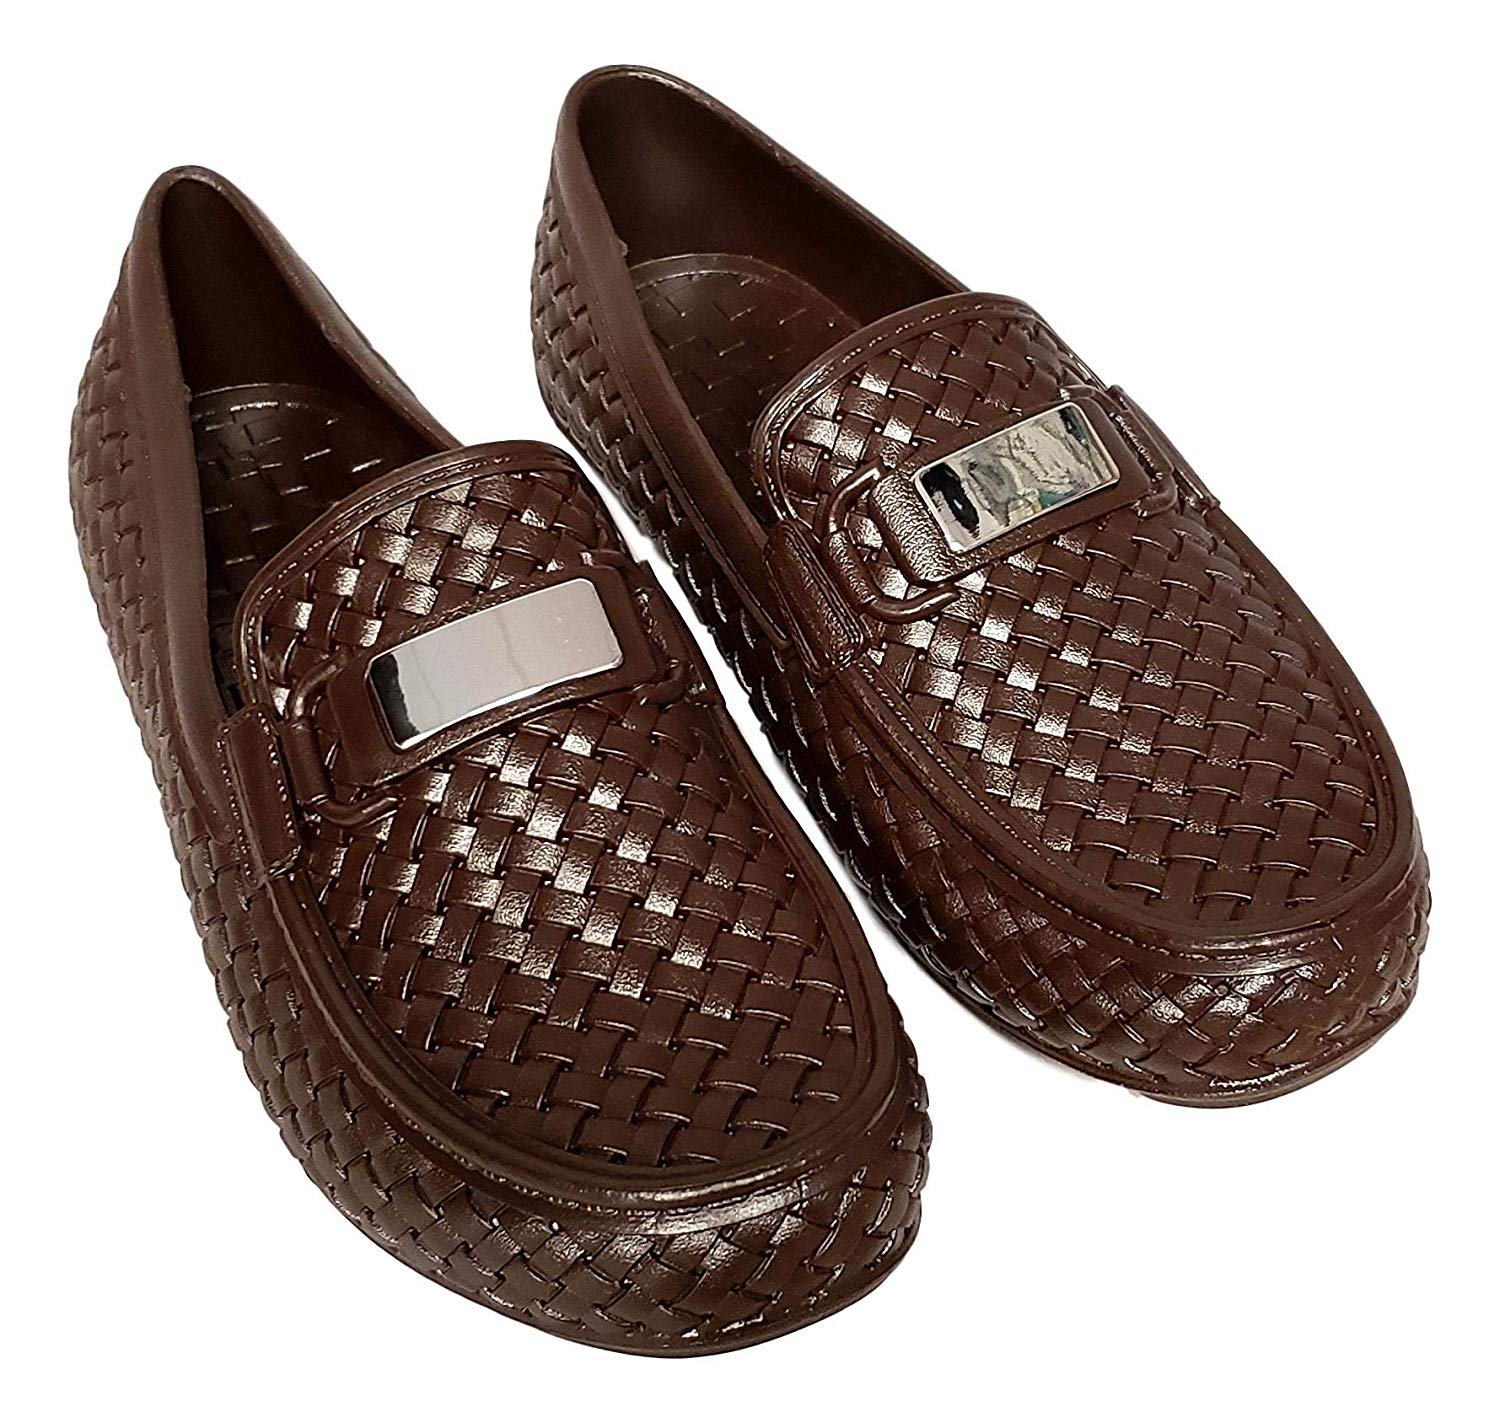 Mens Water Shoe Floater Loafers Classic Look Drivers 9 US M Mens, Brown - image 5 of 6